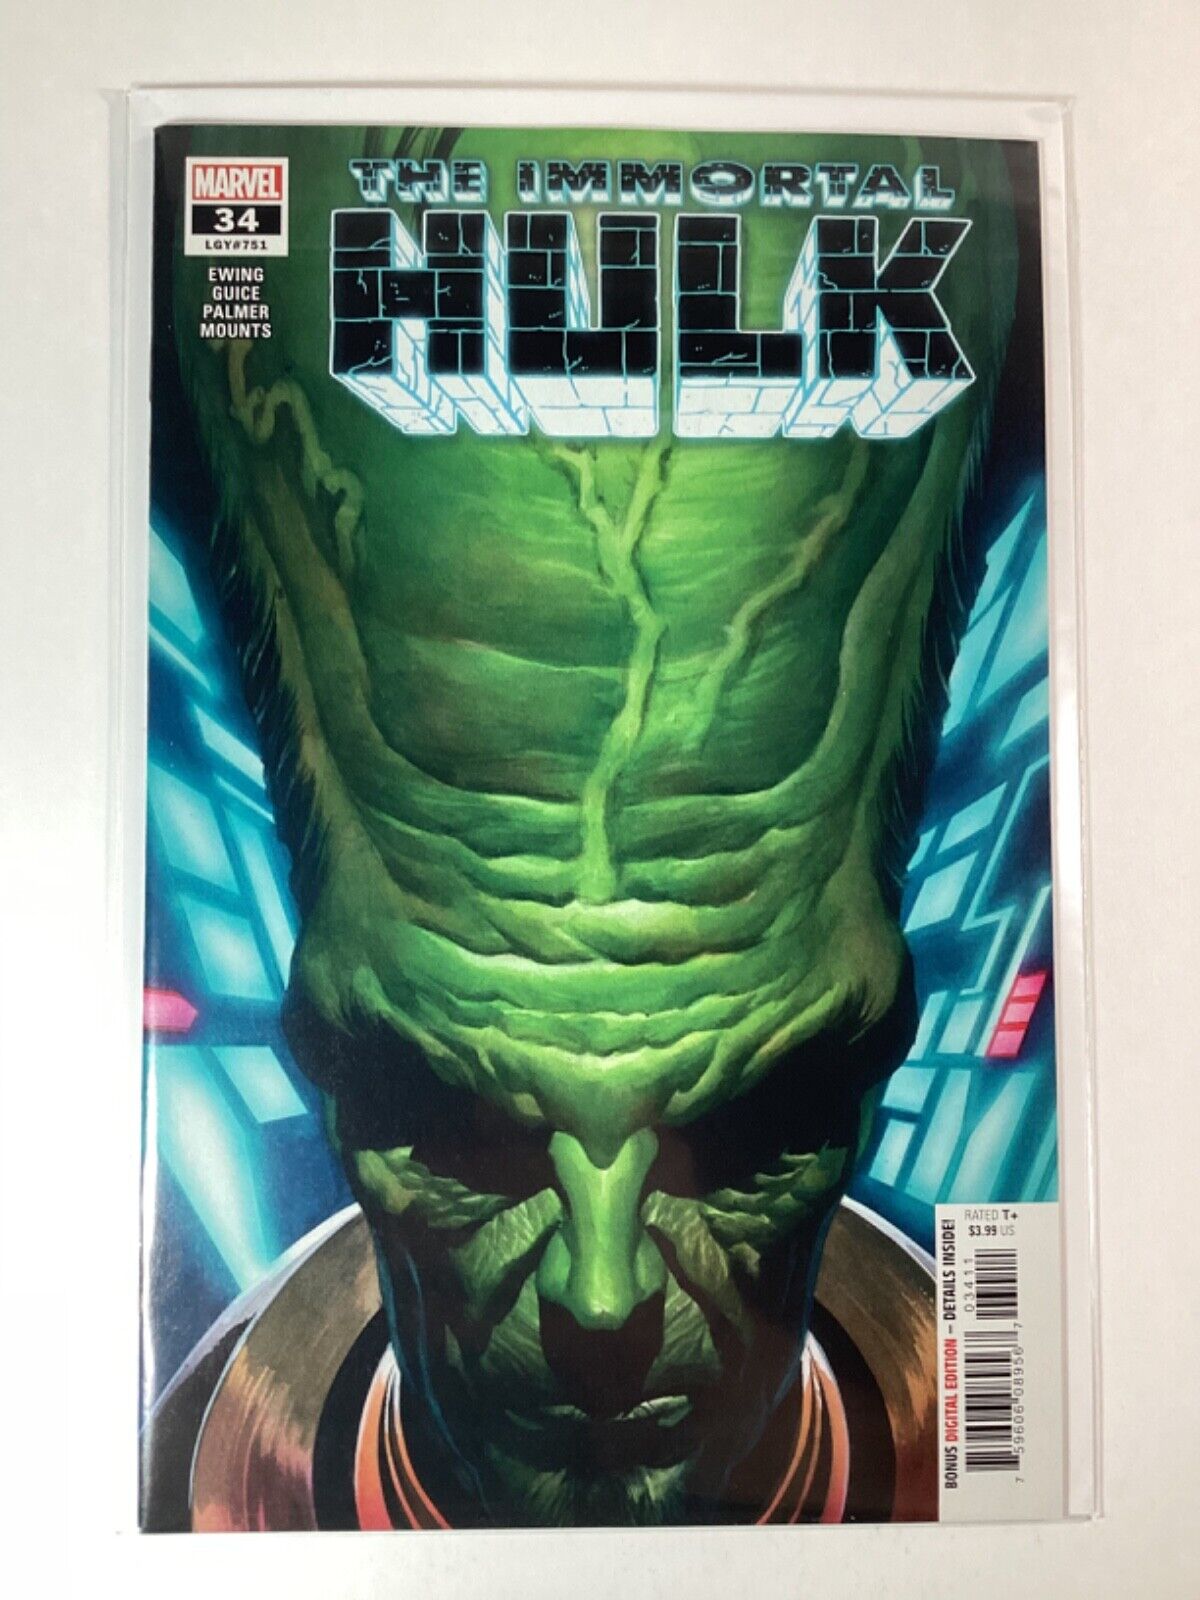 IMMORTAL HULK (2018) #34A NM+ 9.6 🎥LEADER~COMING TO THE MCU🔥Alex Ross Cover🔥